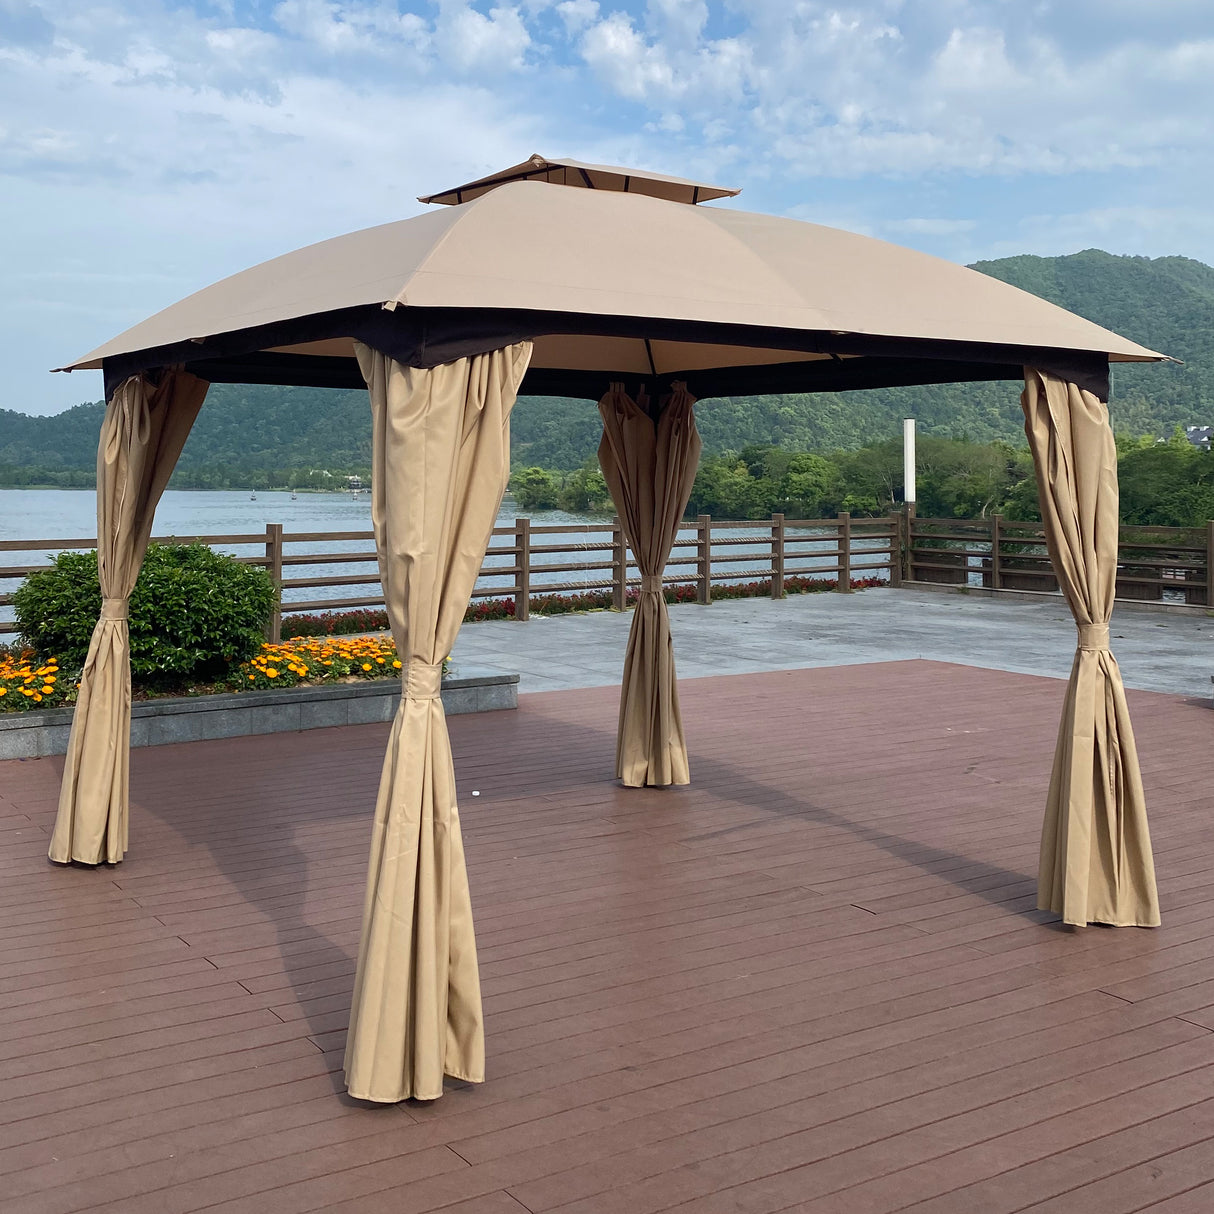 10x10 Ft Outdoor Patio Garden Gazebo Canopy, Outdoor Shading, Gazebo Tent With Curtains